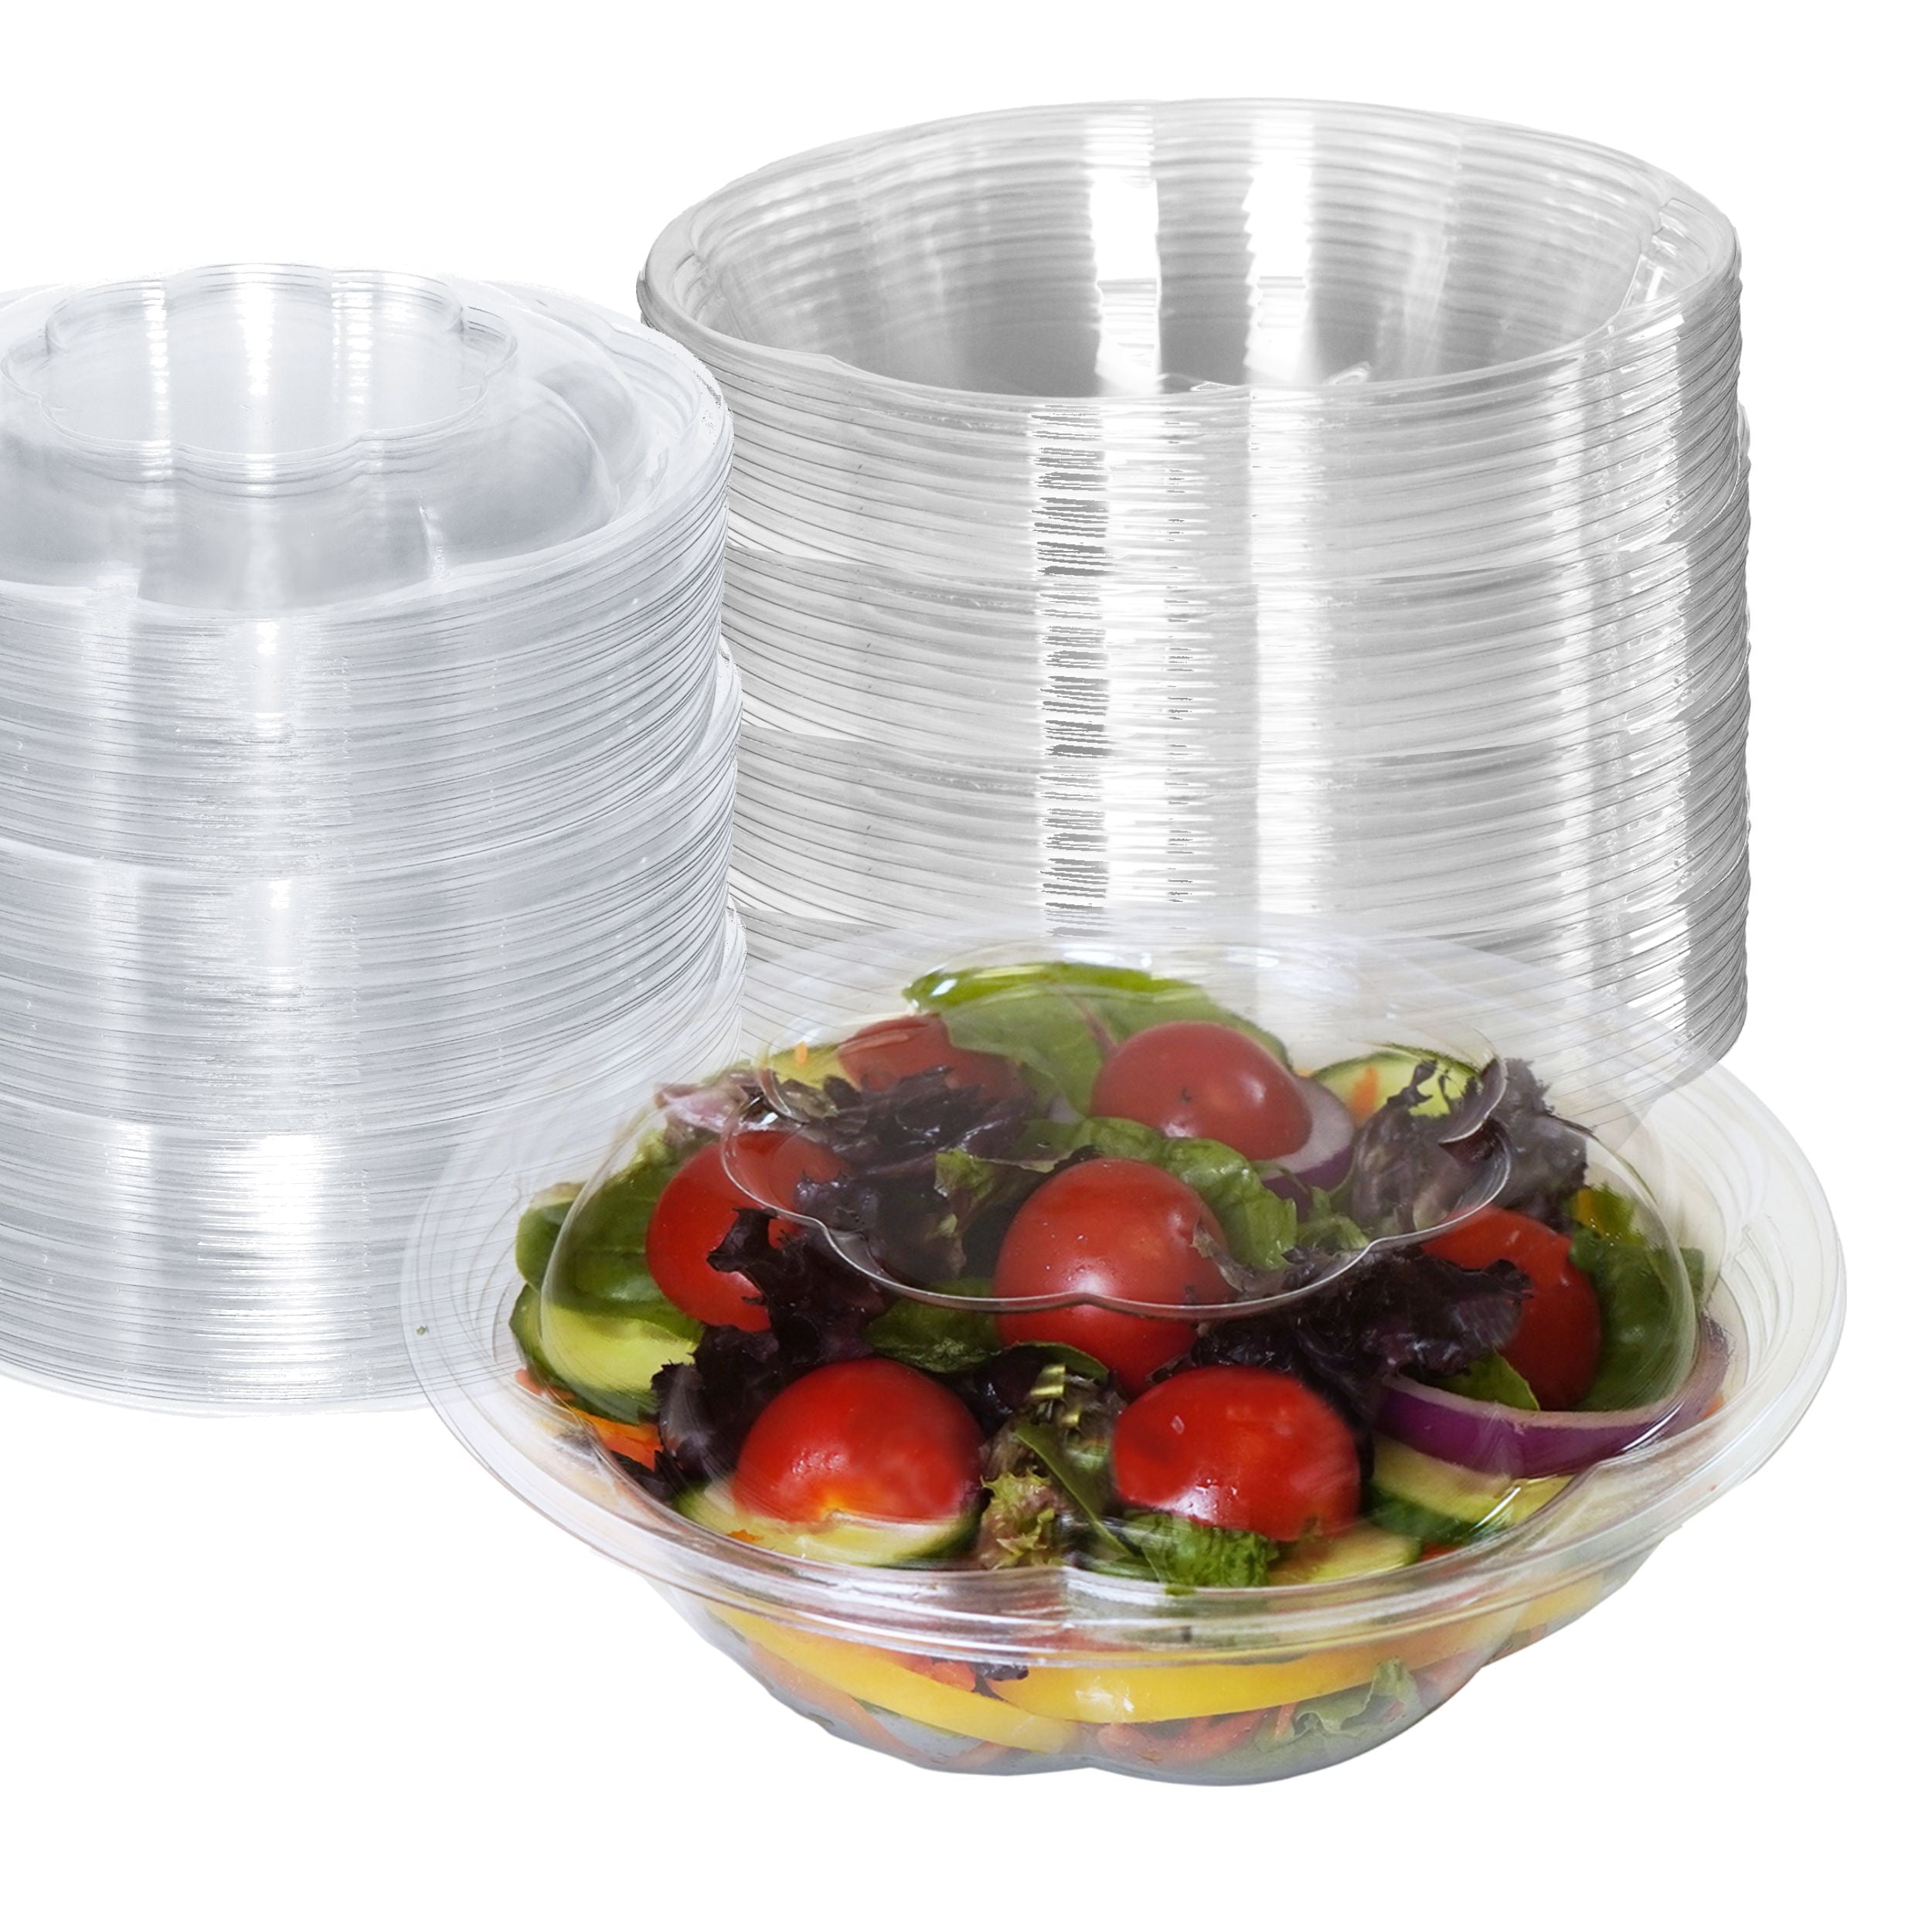 Spec101 Plastic Salad Bowl with Lid Meal Prep Container 50-Pack - 48-Ounce  Clear Disposable Bowls with Lids - Meal Planning Containers for Lunches